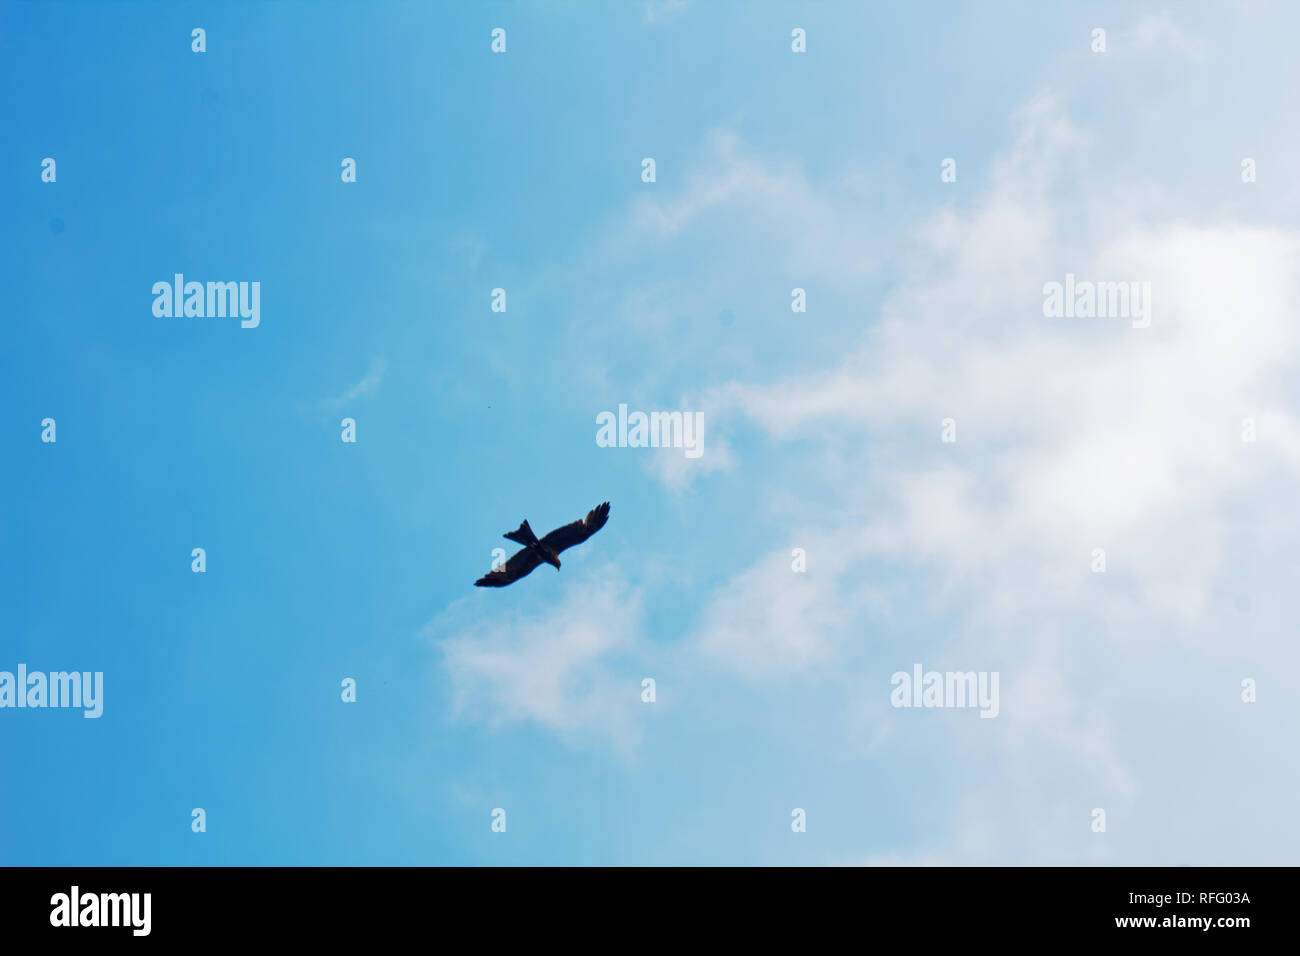 Bird flying in the sky, soaring with outstretched wings on a bright sunny day. Stock Photo